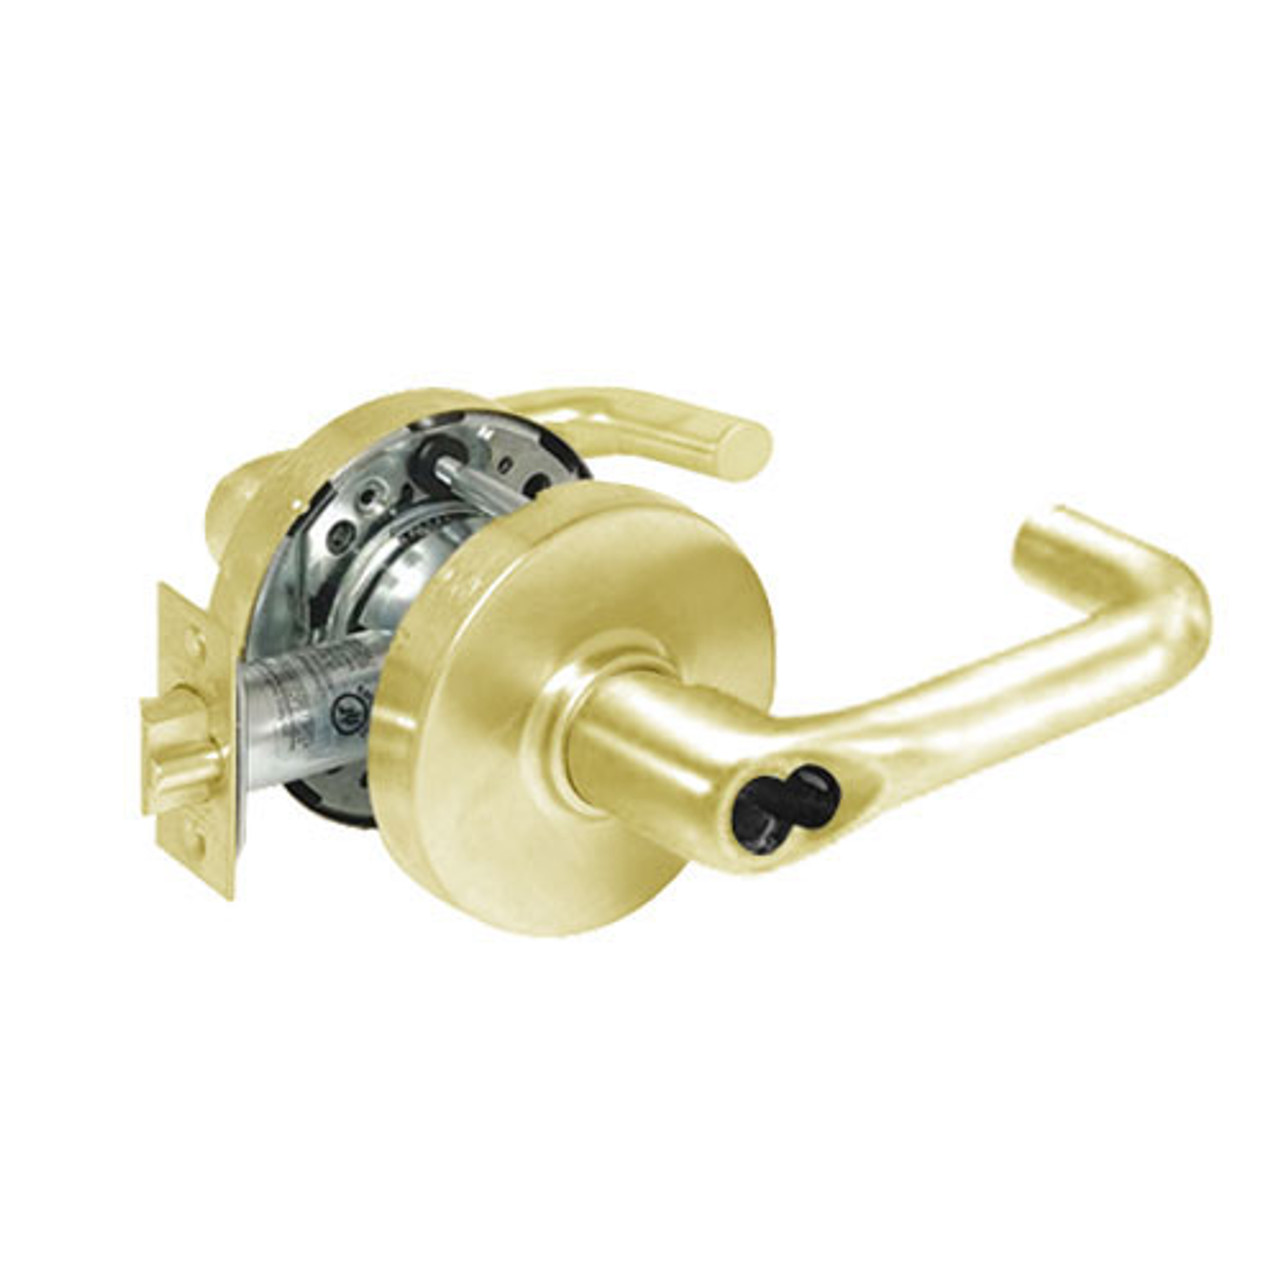 2860-10G38-LJ-03 Sargent 10 Line Cylindrical Classroom Locks with J Lever Design and L Rose Prepped for LFIC in Bright Brass